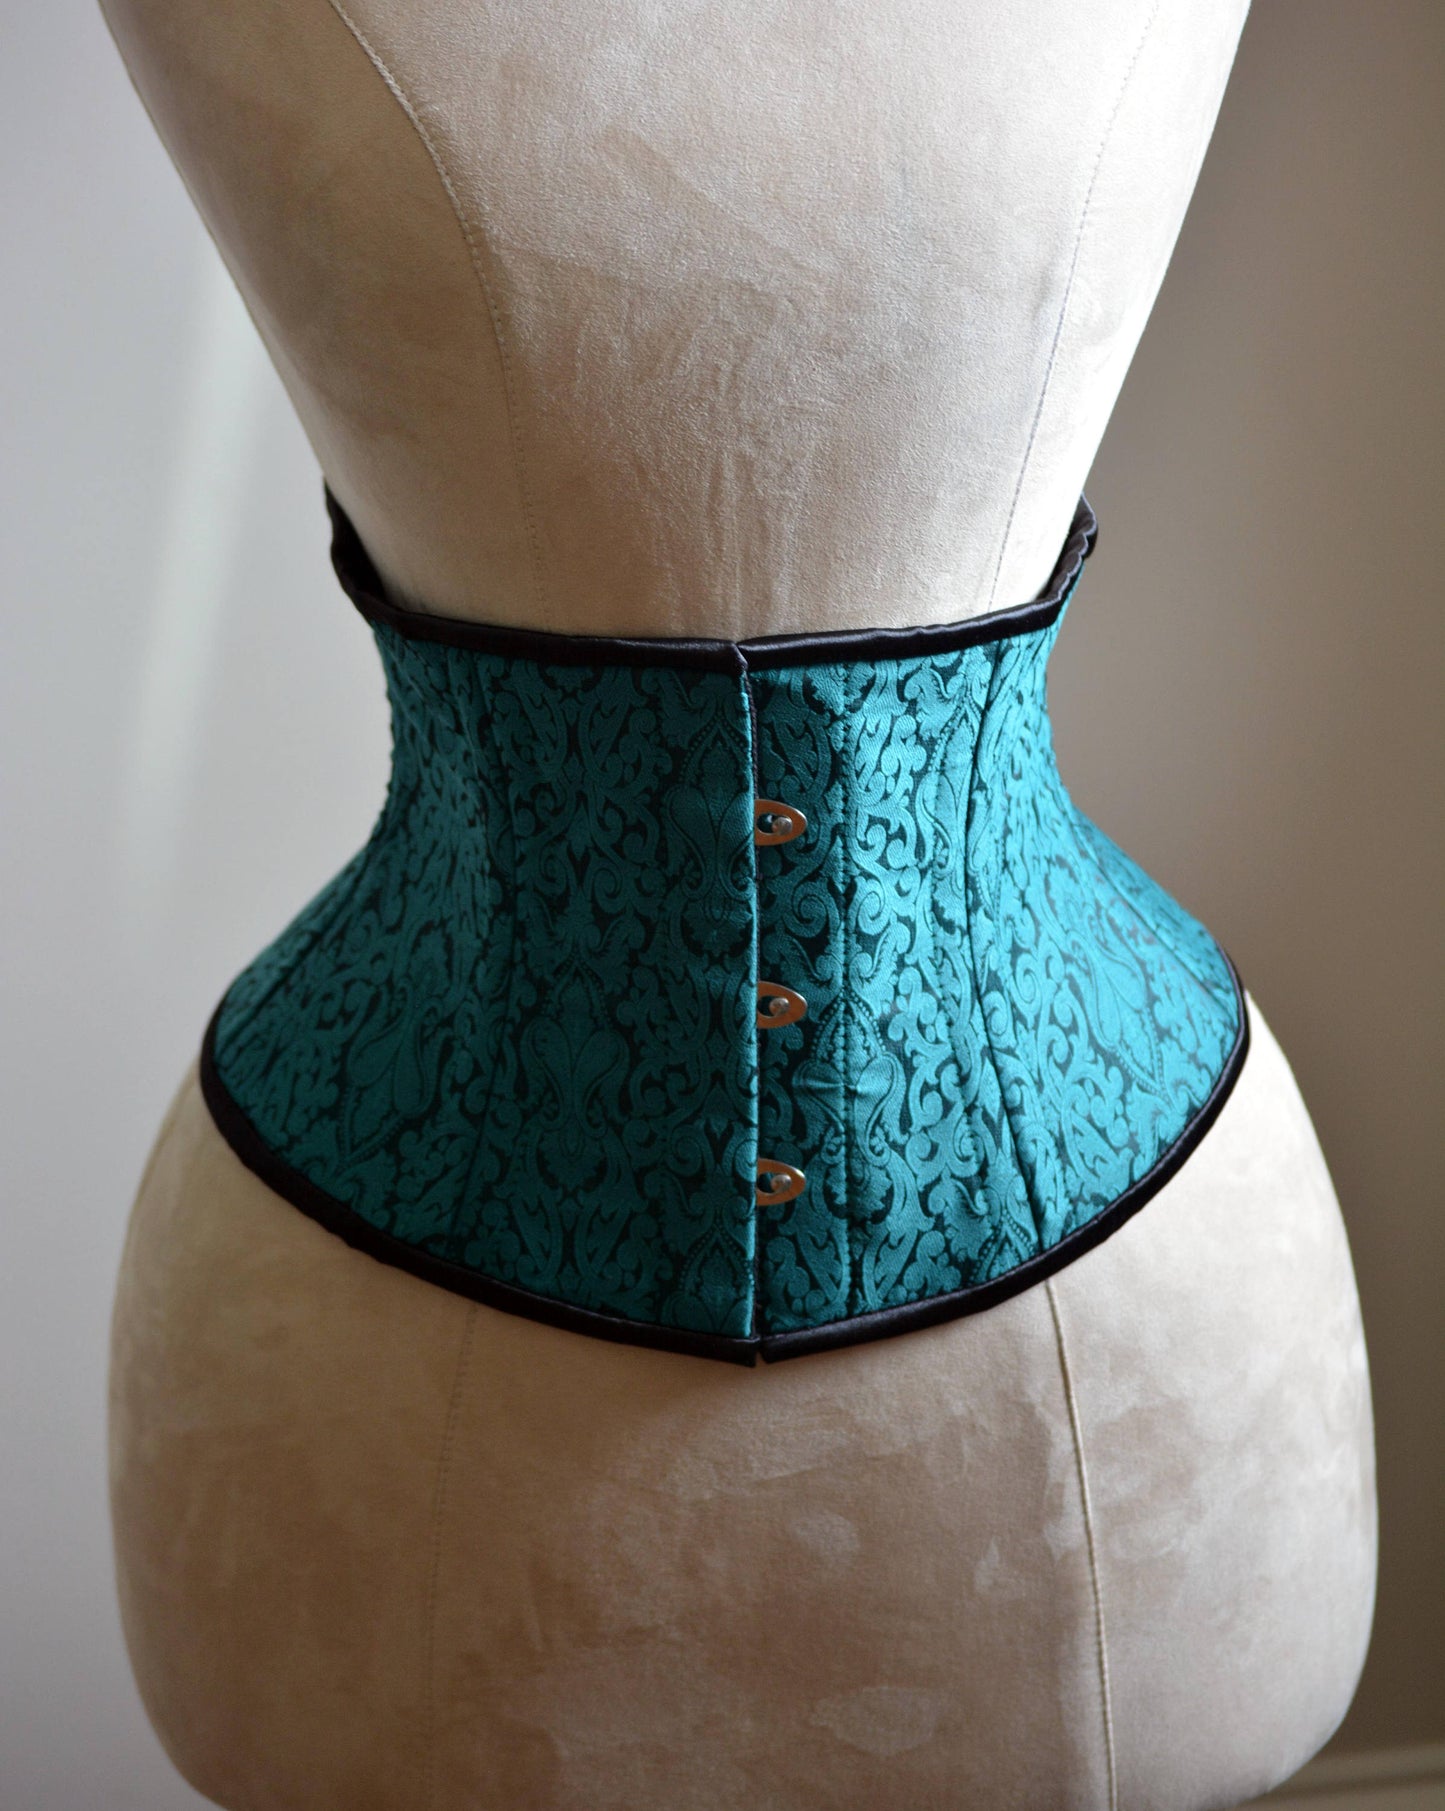 Classic brocade steel-boned authentic waspie corset for tight lacing and waist training. Gothic, vintage, historical, Renaissance Corsettery